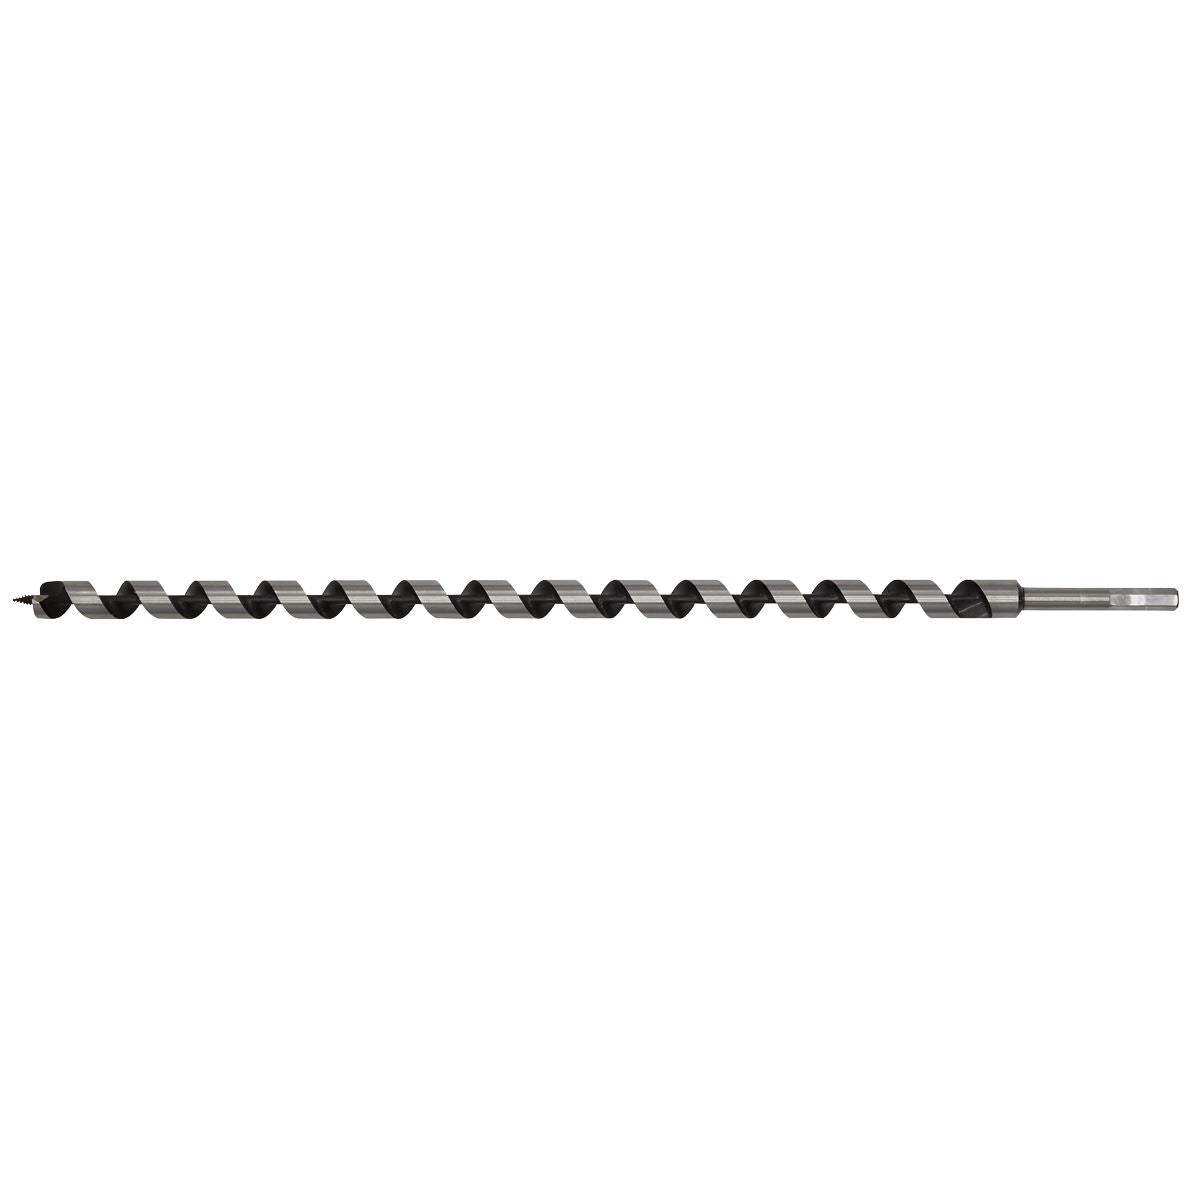 Worksafe by Sealey Auger Wood Drill Bit 20mm x 600mm